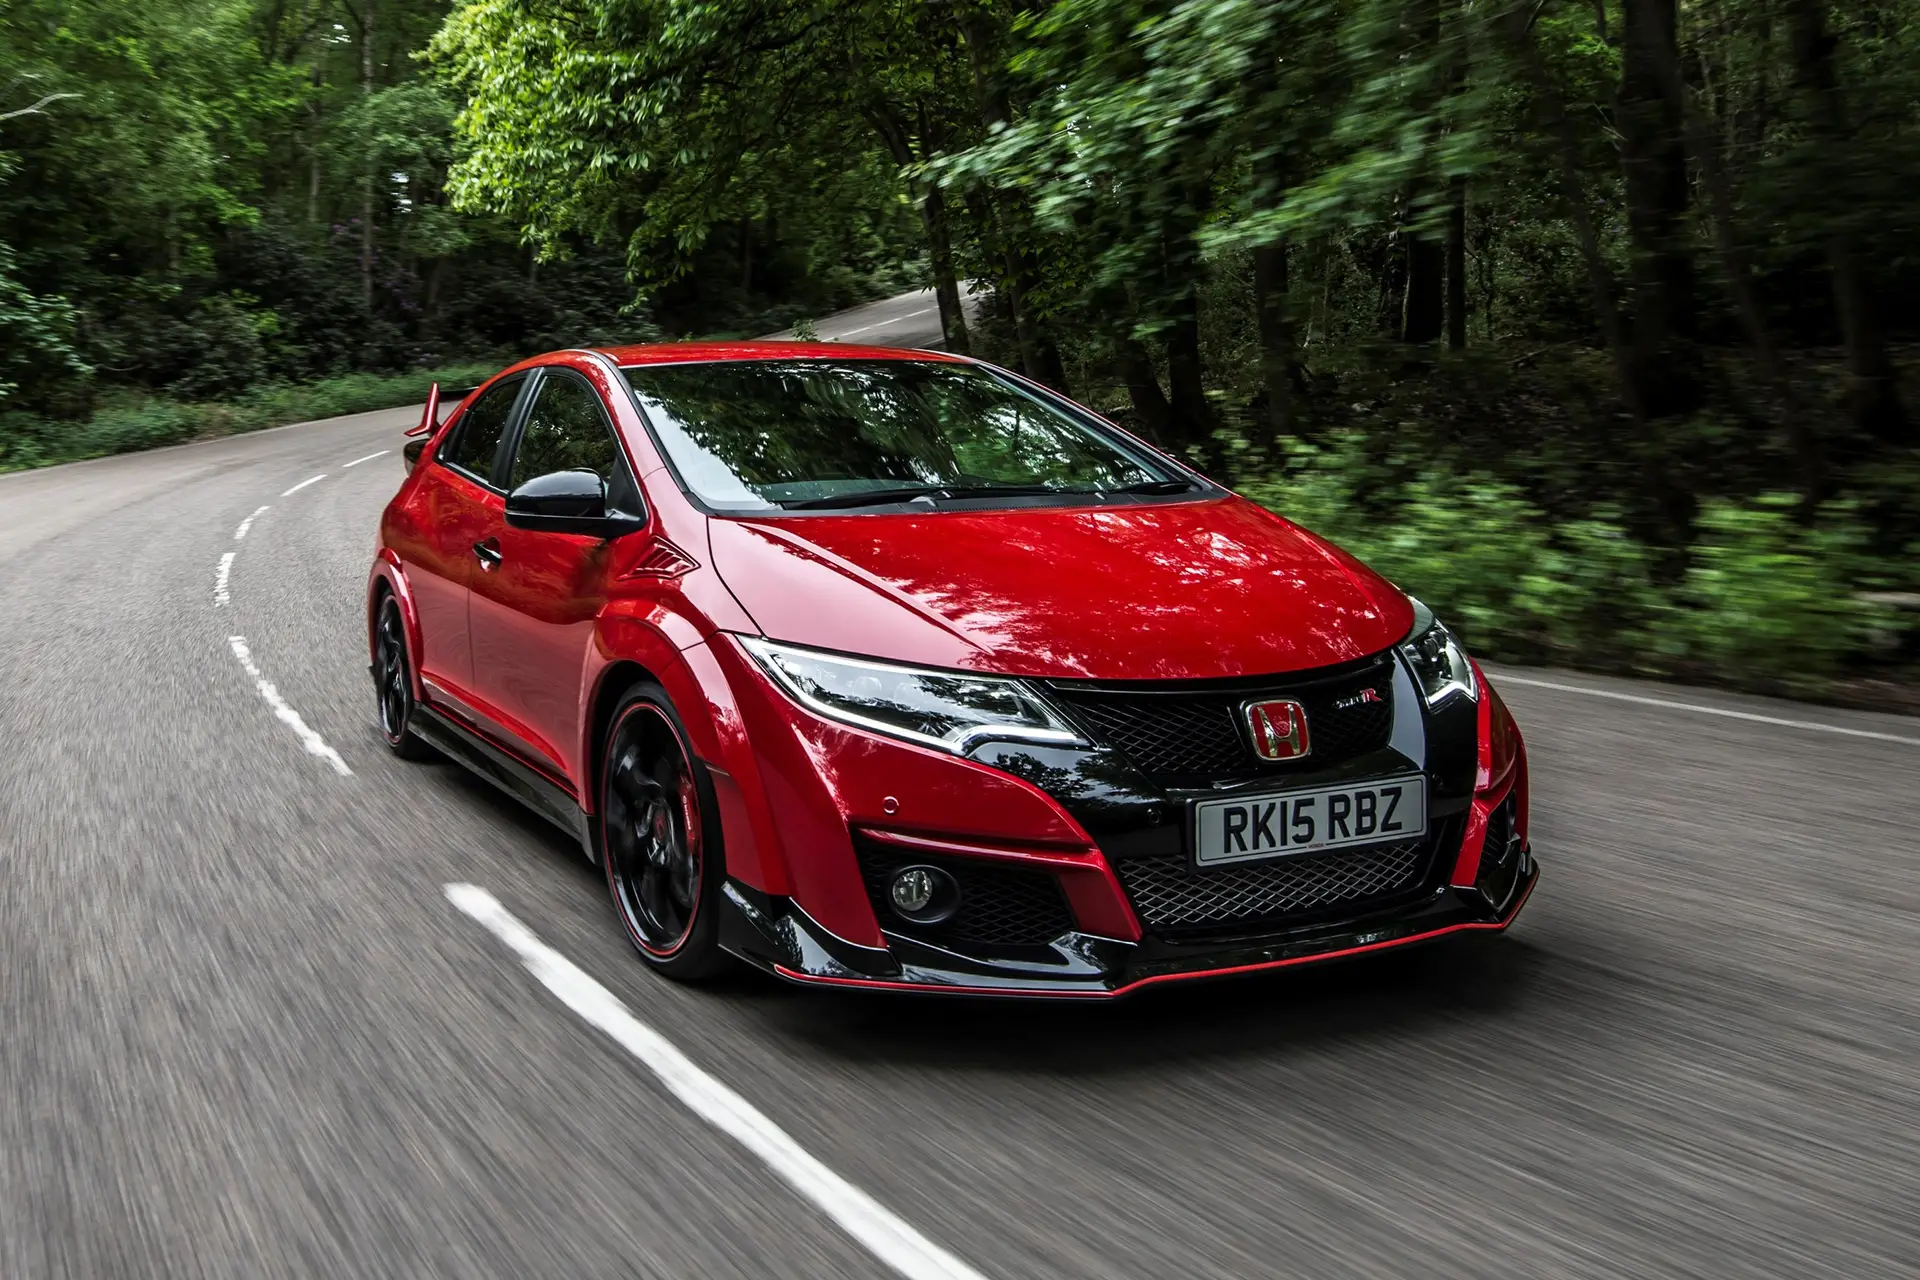 Honda Civic Type R (2015-2017) Review: exterior front three quarter photo of the Honda Civic Type R on the road